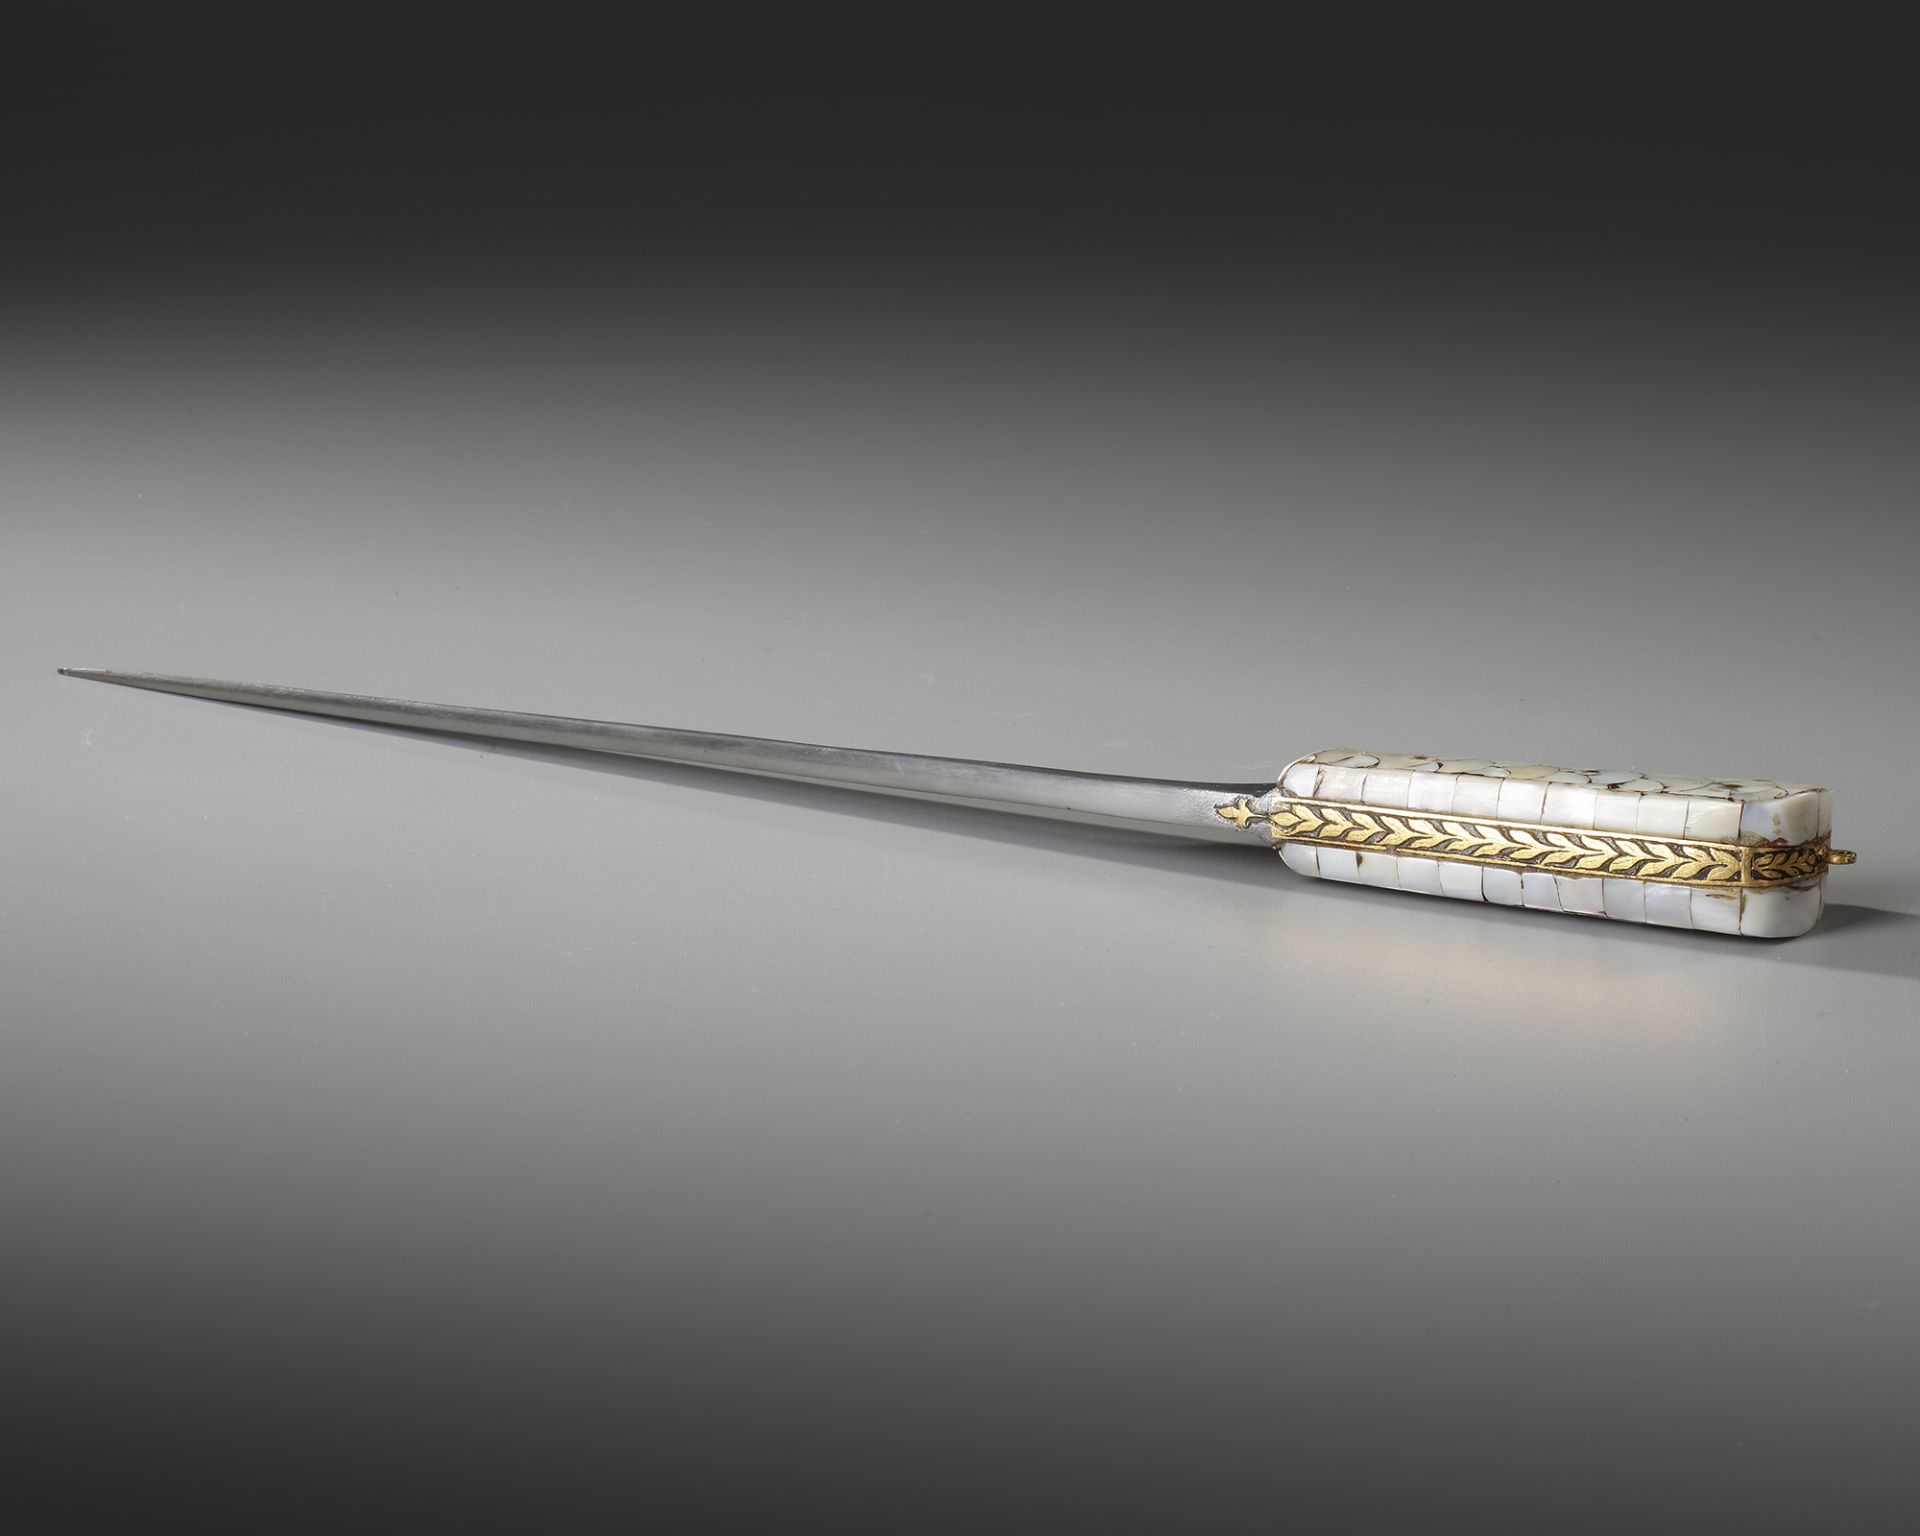 A MOTHER-OF-PEARL HILTED DAGGER (PESHKABZ), INDIA, GUJARAT, 18TH CENTURY - Image 3 of 3